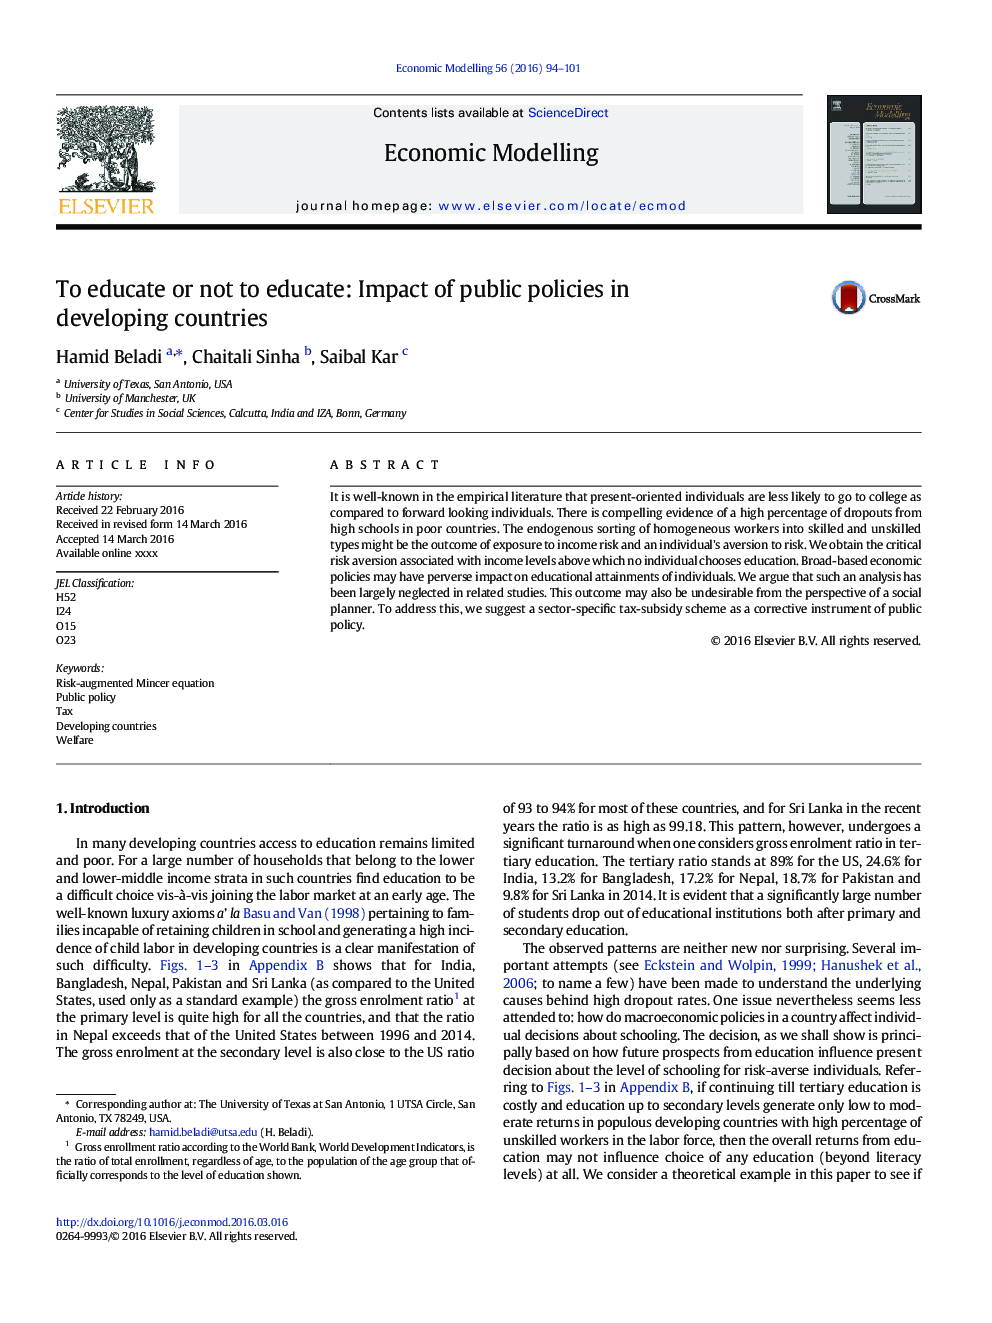 To educate or not to educate: Impact of public policies in developing countries